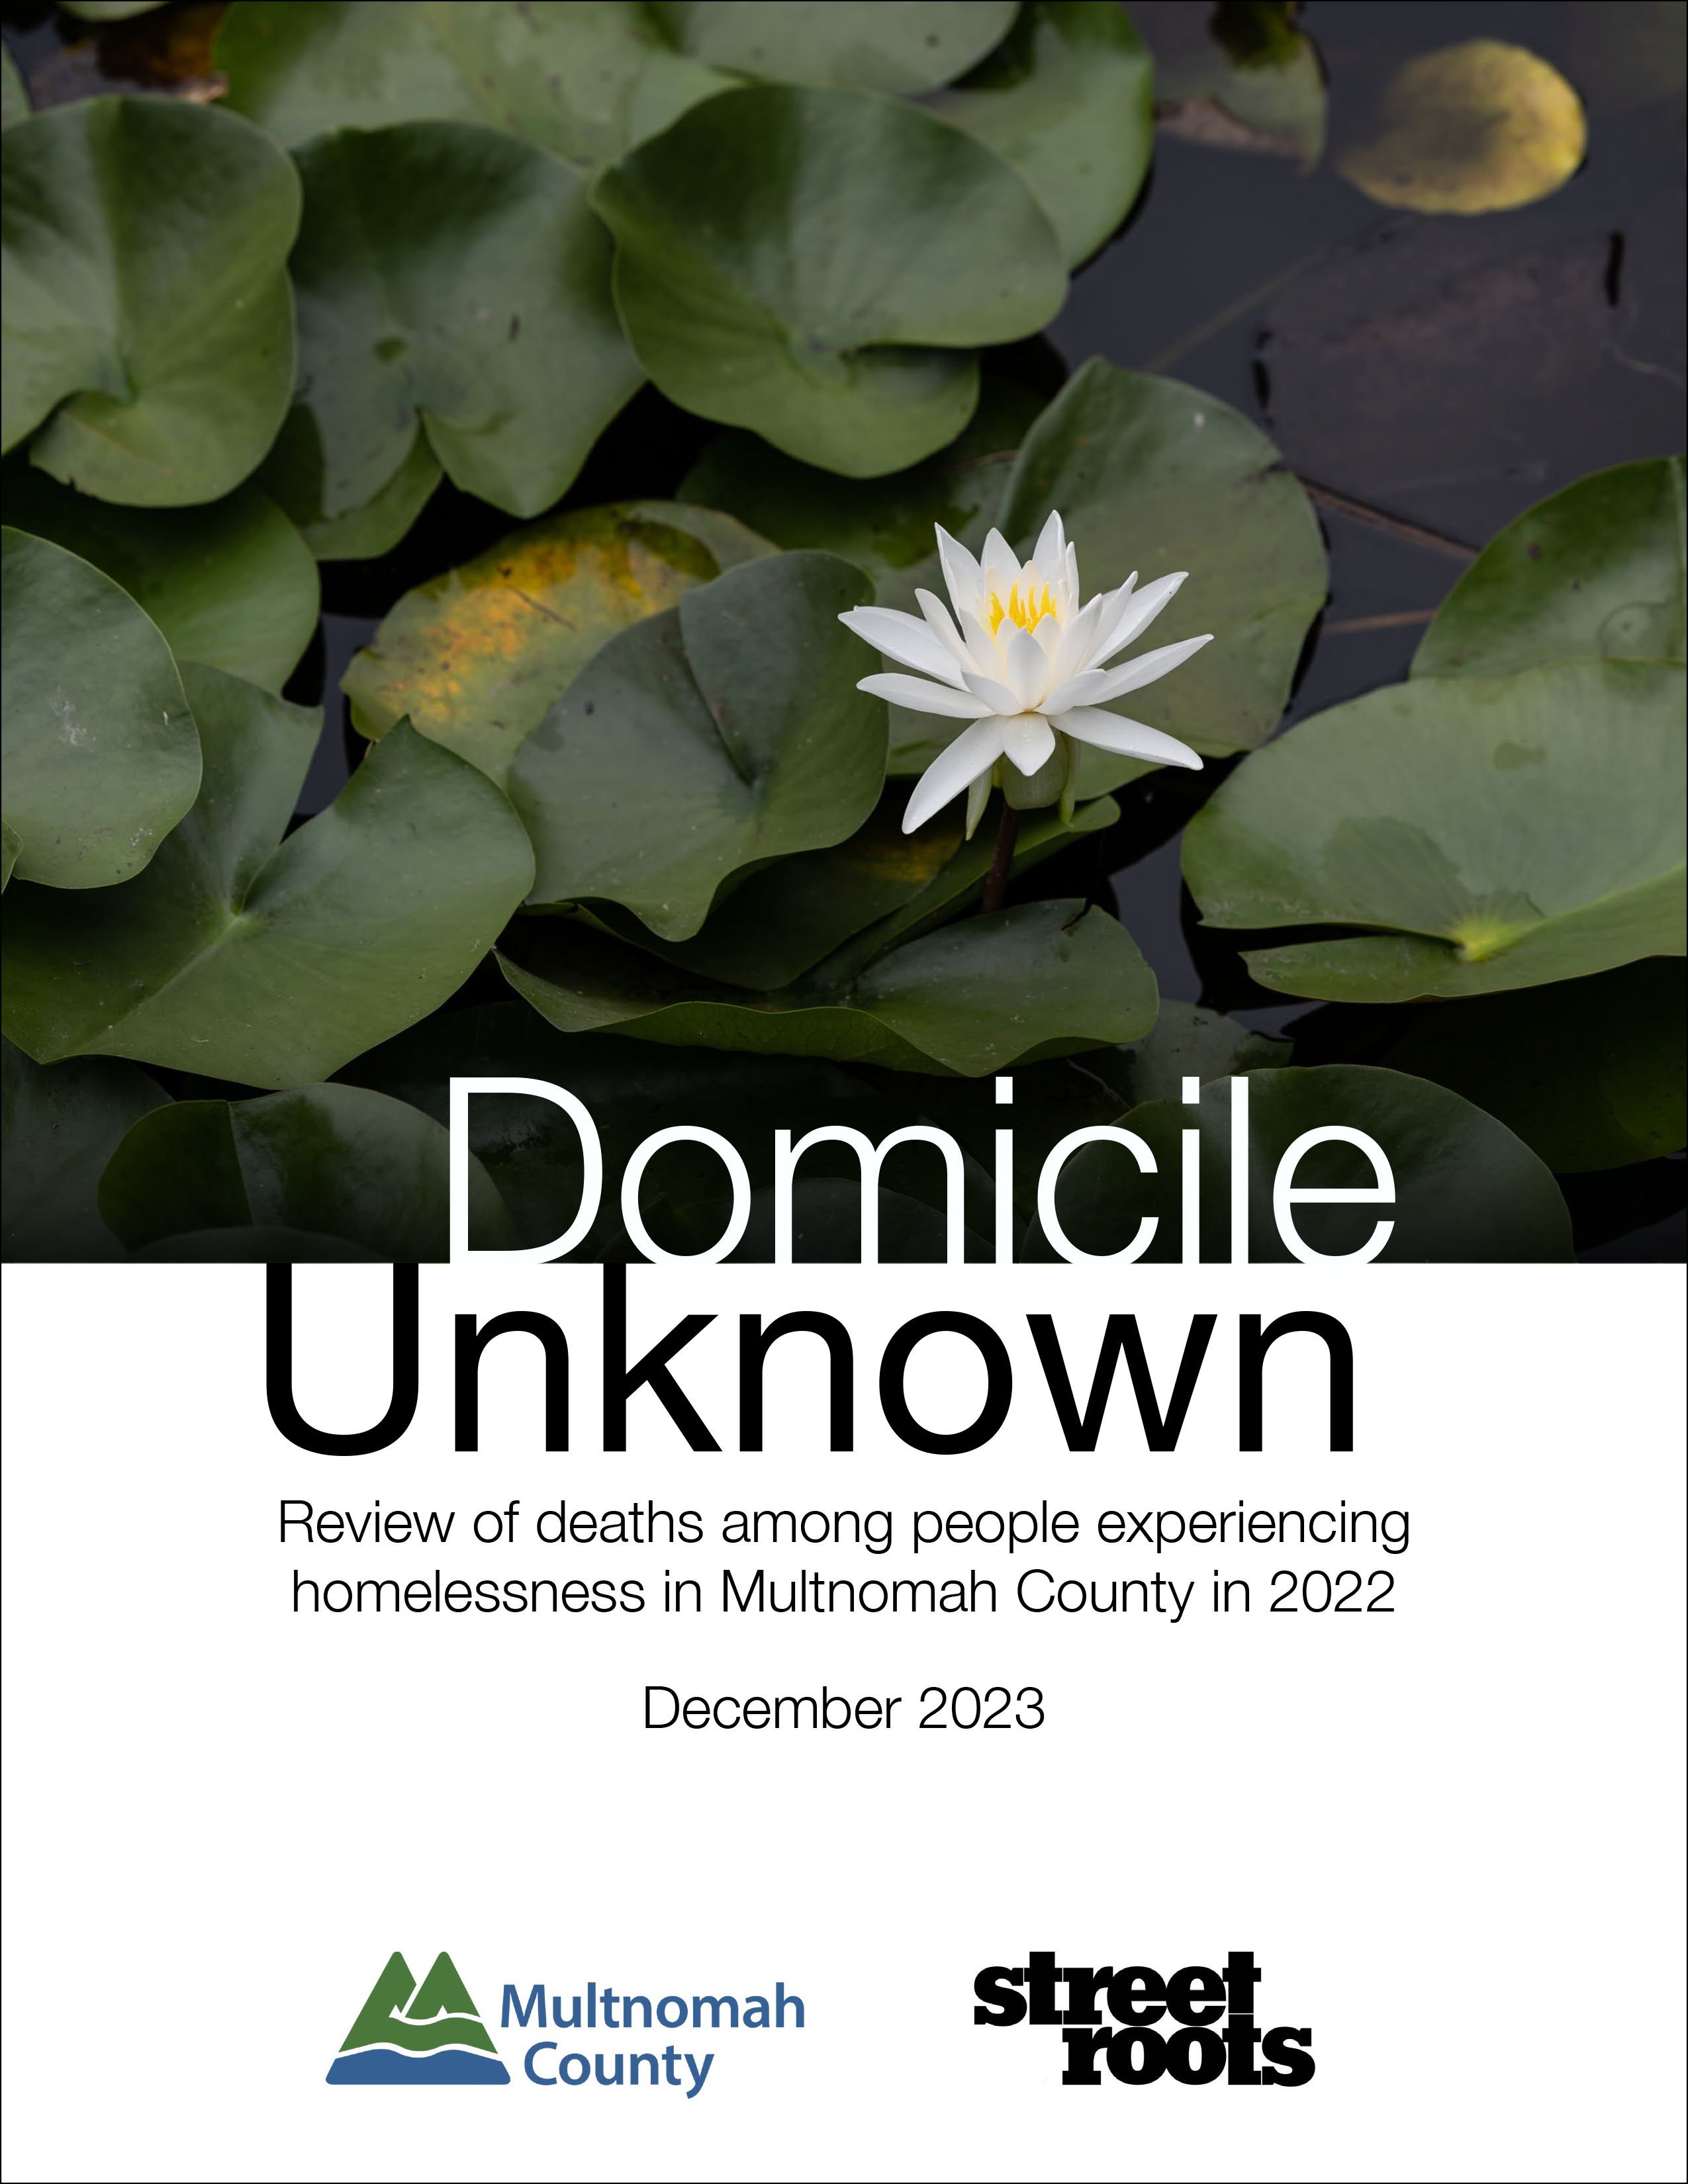 Cover of 2023 Domicile Unknown Report. Text says, "Review of deaths of people experiencing homelessness in Multnomah County in 2022."